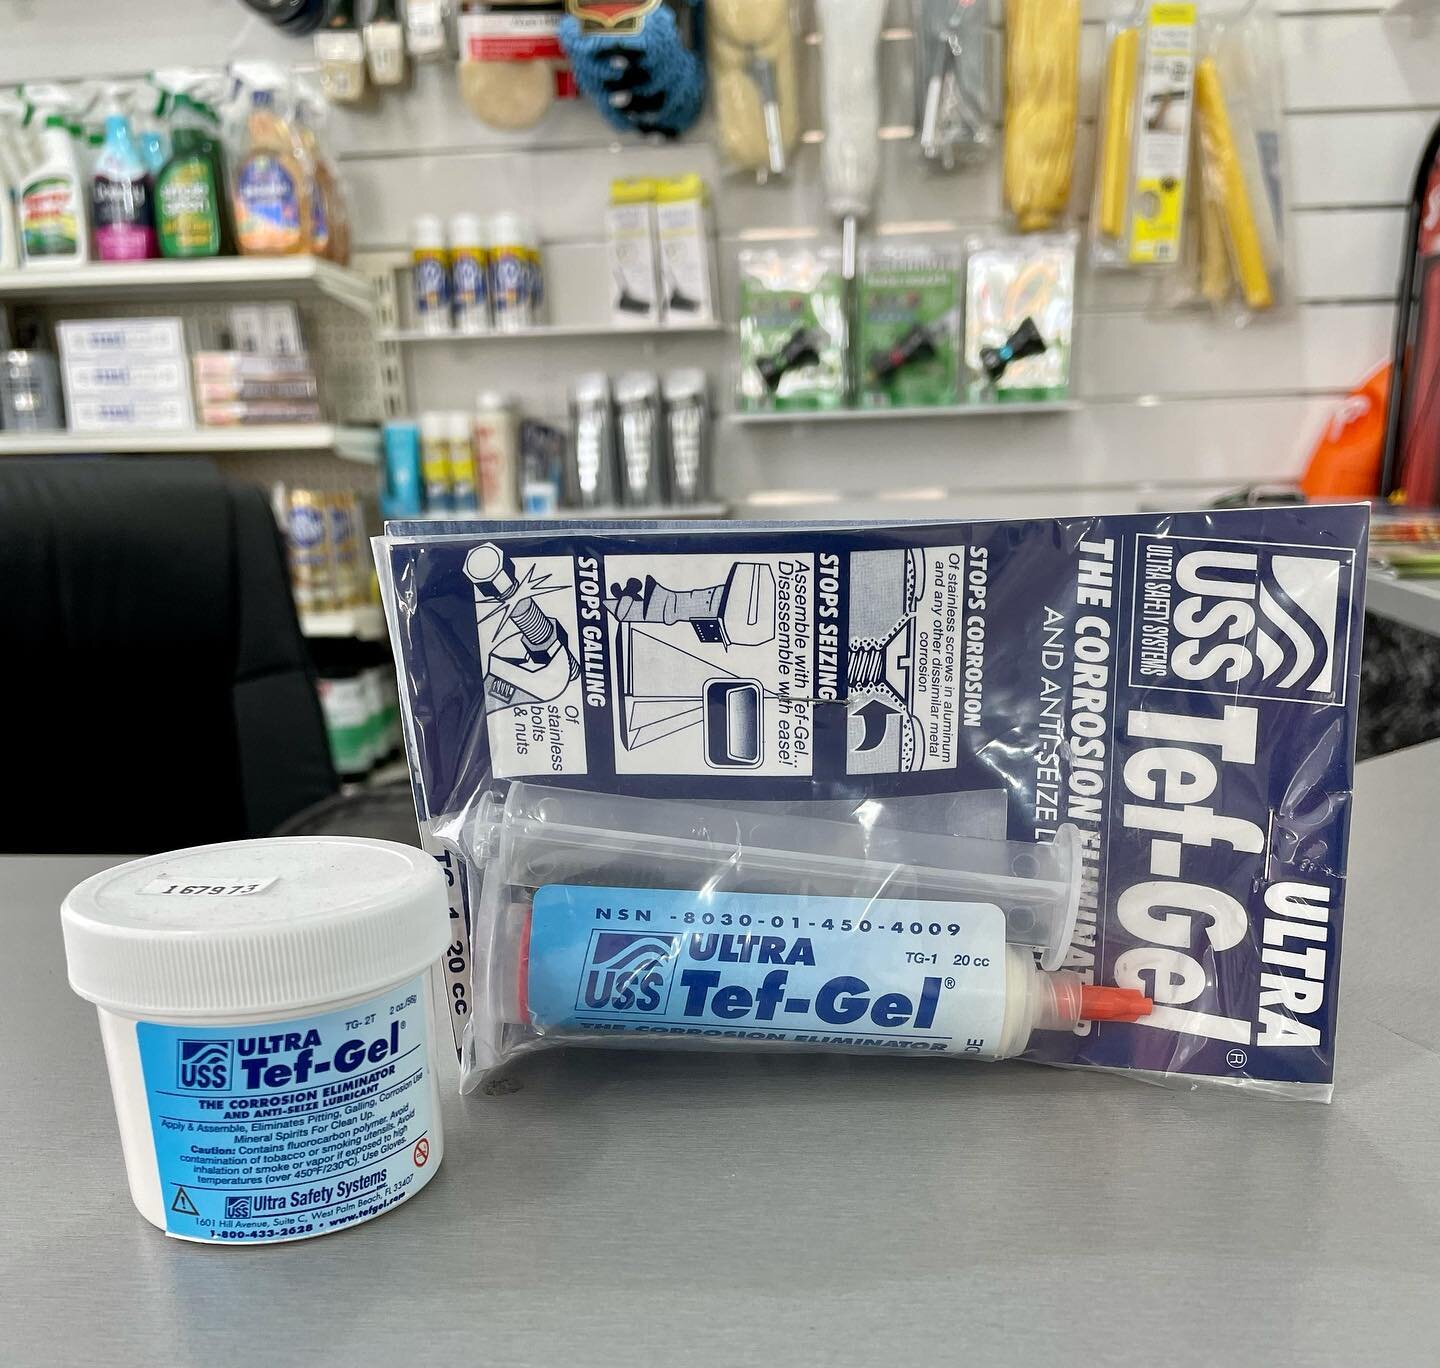 Tef Gel now back in stock !

Tef-Gel is the perfect jointing compound for fasteners being used in dissimilar metals, such as stainless fasteners in aluminum masts, spars and tracks.

&bull;Eliminates Corrosion between dissimilar metals
&bull;Prevents